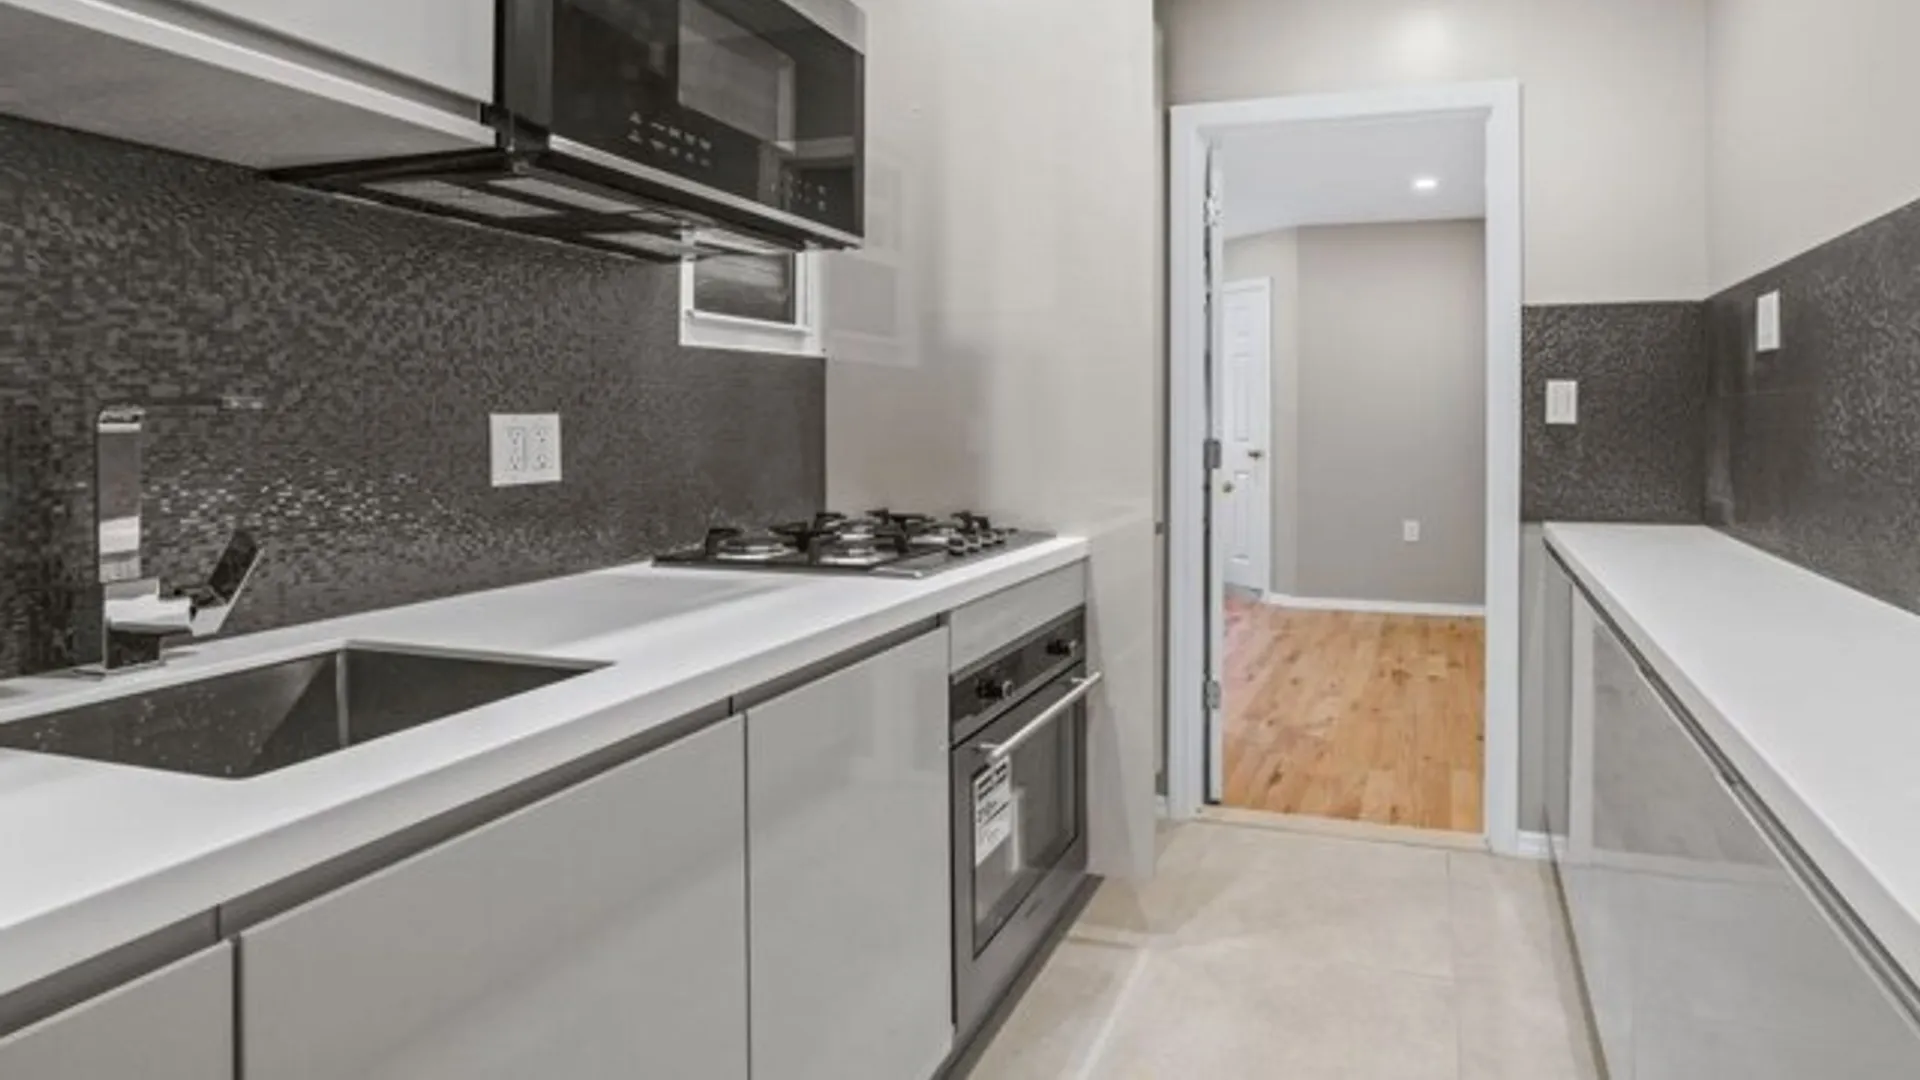 723 11th Avenue, New York, NY 10019, USA | 3 bed apartment for rent